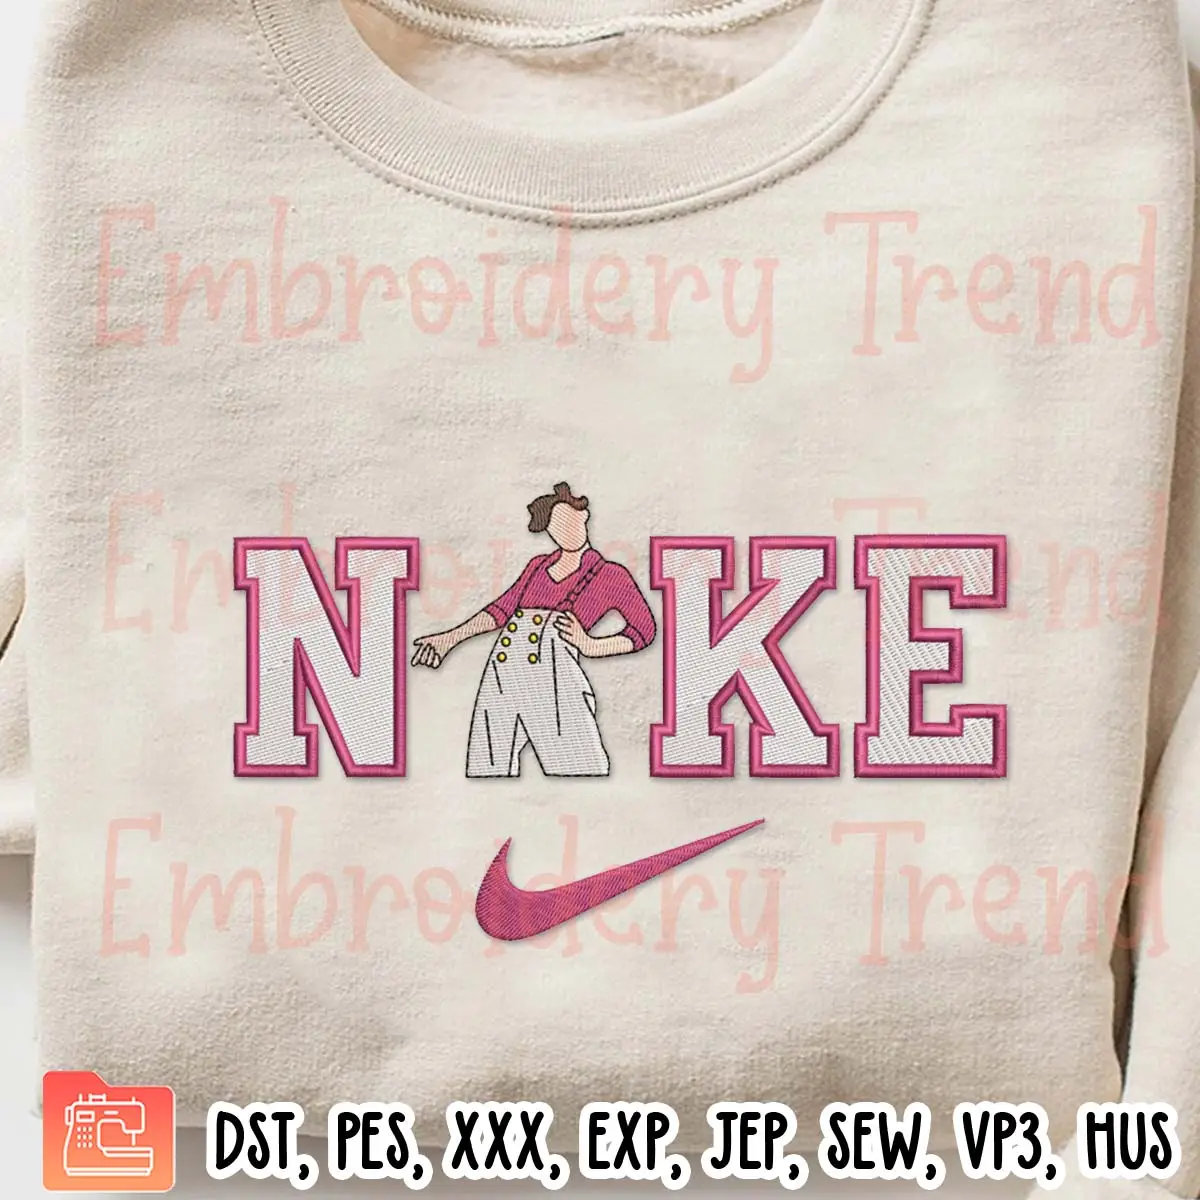 Harry Styles x Nike Embroidery Design, Gift for Fans Embroidery Digitizing File